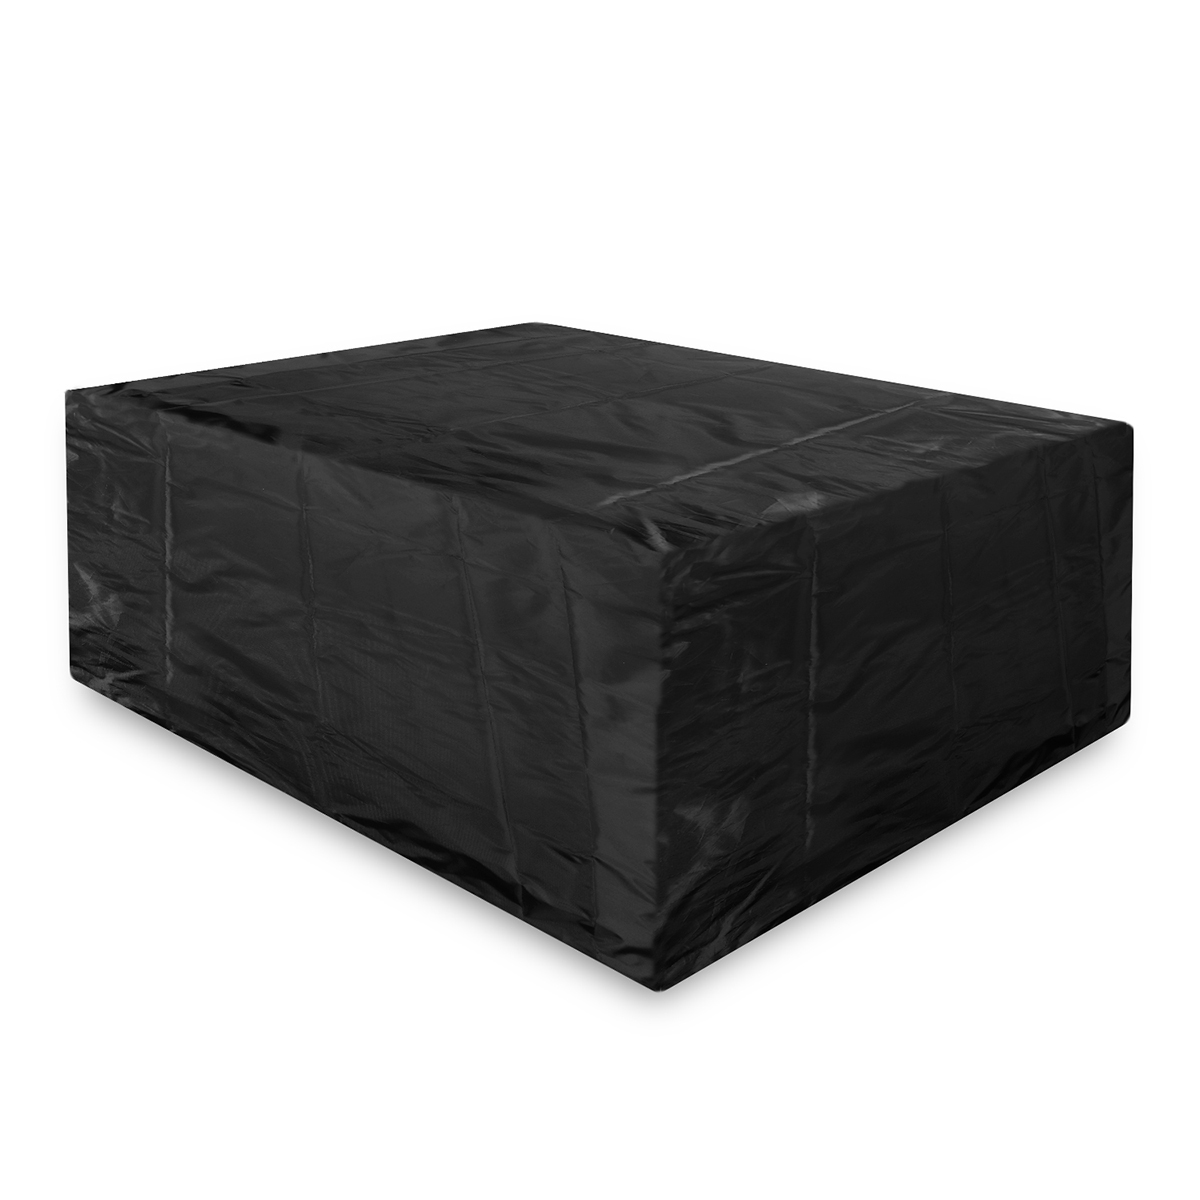 

Outdoor Table Cover Patio Protection Garden Furniture Dustproof Cover Rain Waterproof Box